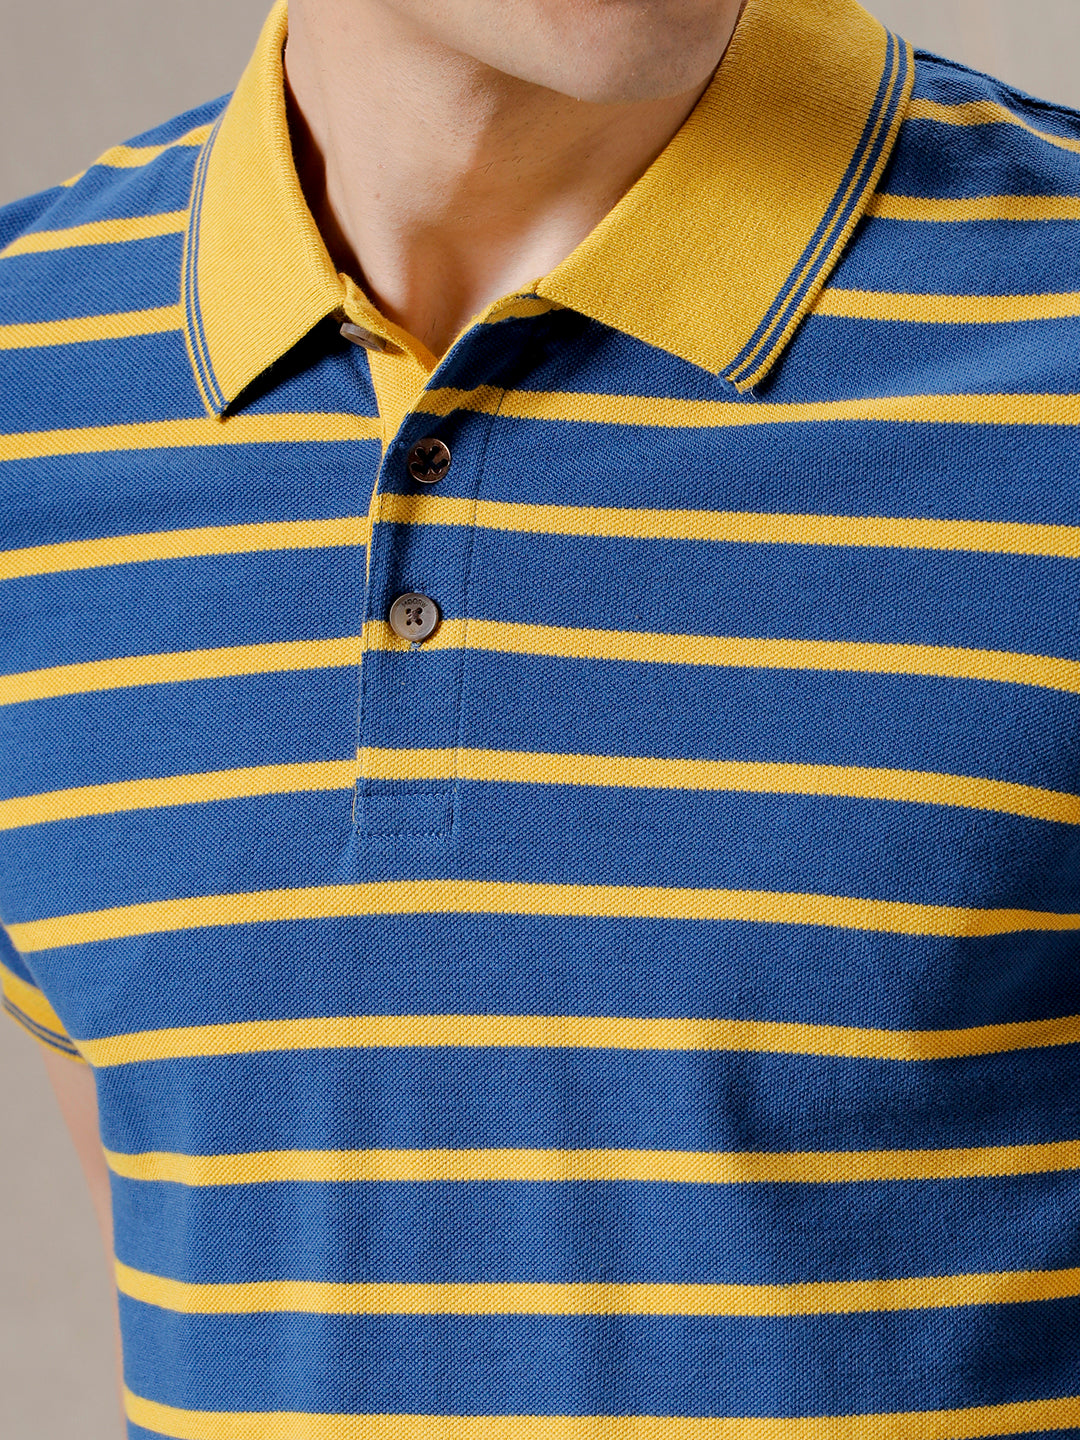 Yellow On Blue Striped Polo T-Shirt